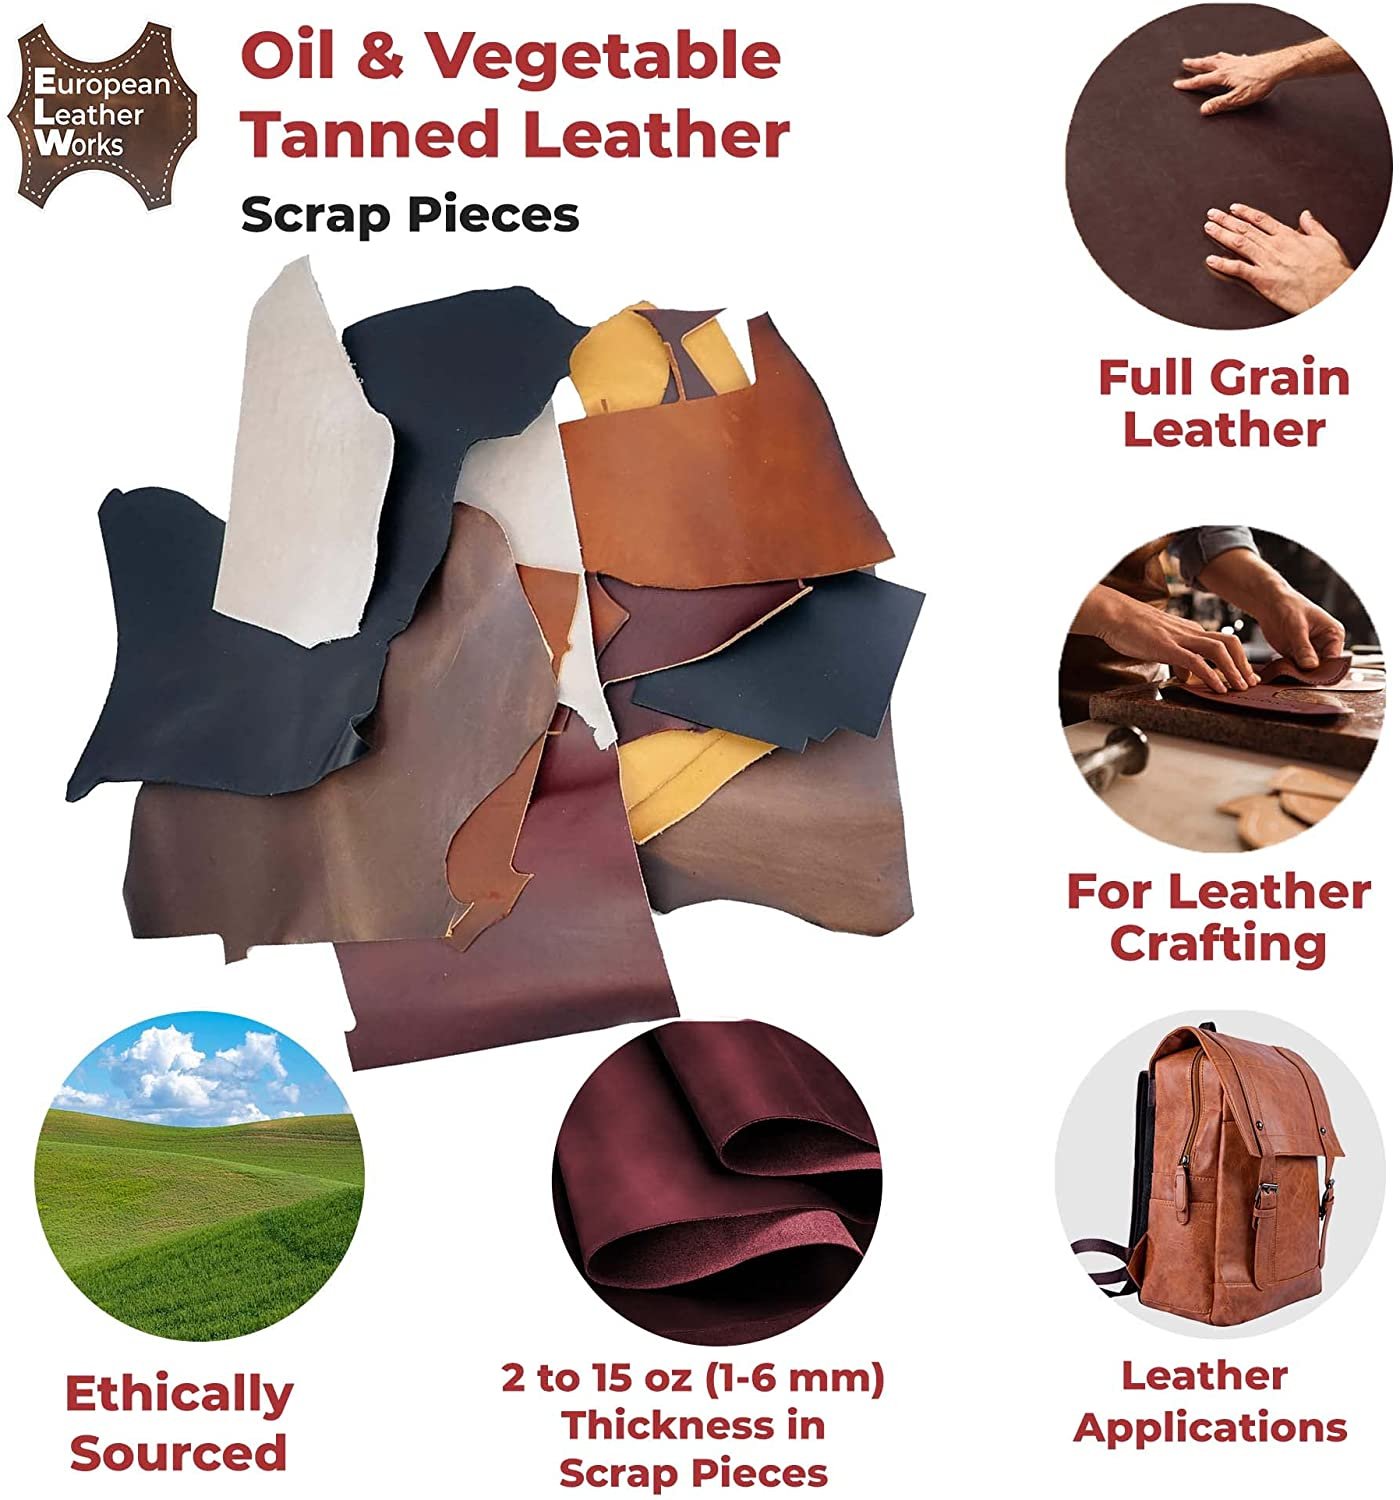 ELW Vegetable Tanned Leather ScrapsHeavyweight 6-10 oz 2.4-4mm Thickness 4  LBCowhide Remnants Full Grain Leather for Tooling, Holsters, Knife Sheath,  Carving, Embossing, Stamping 